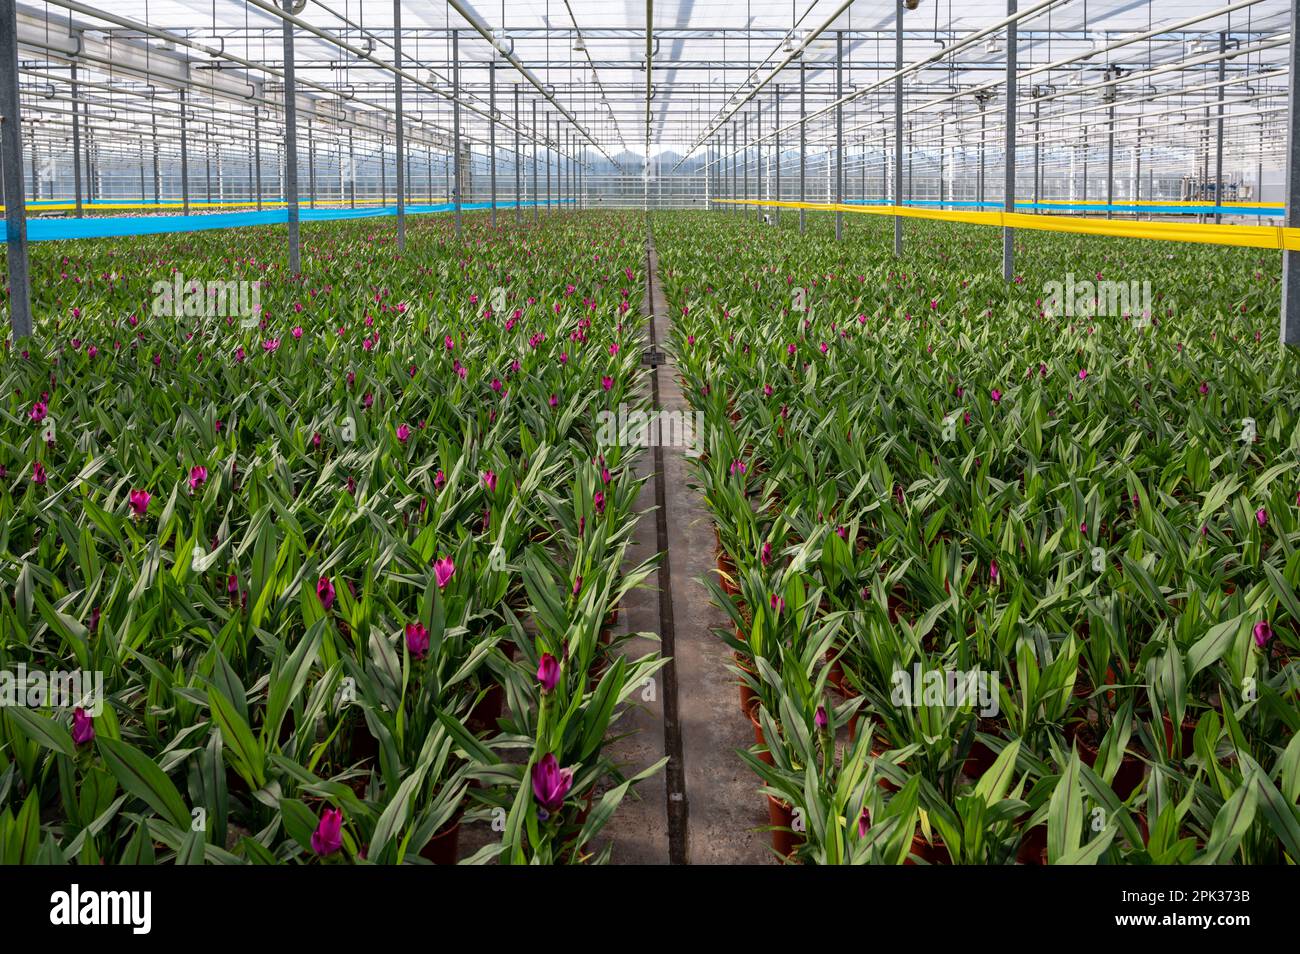 Young plants of Turmeric, Curcuma longa flowering plant of ginger family, decorative or ornamental flower growing in Dutch greenhouse, the Netherlands Stock Photo